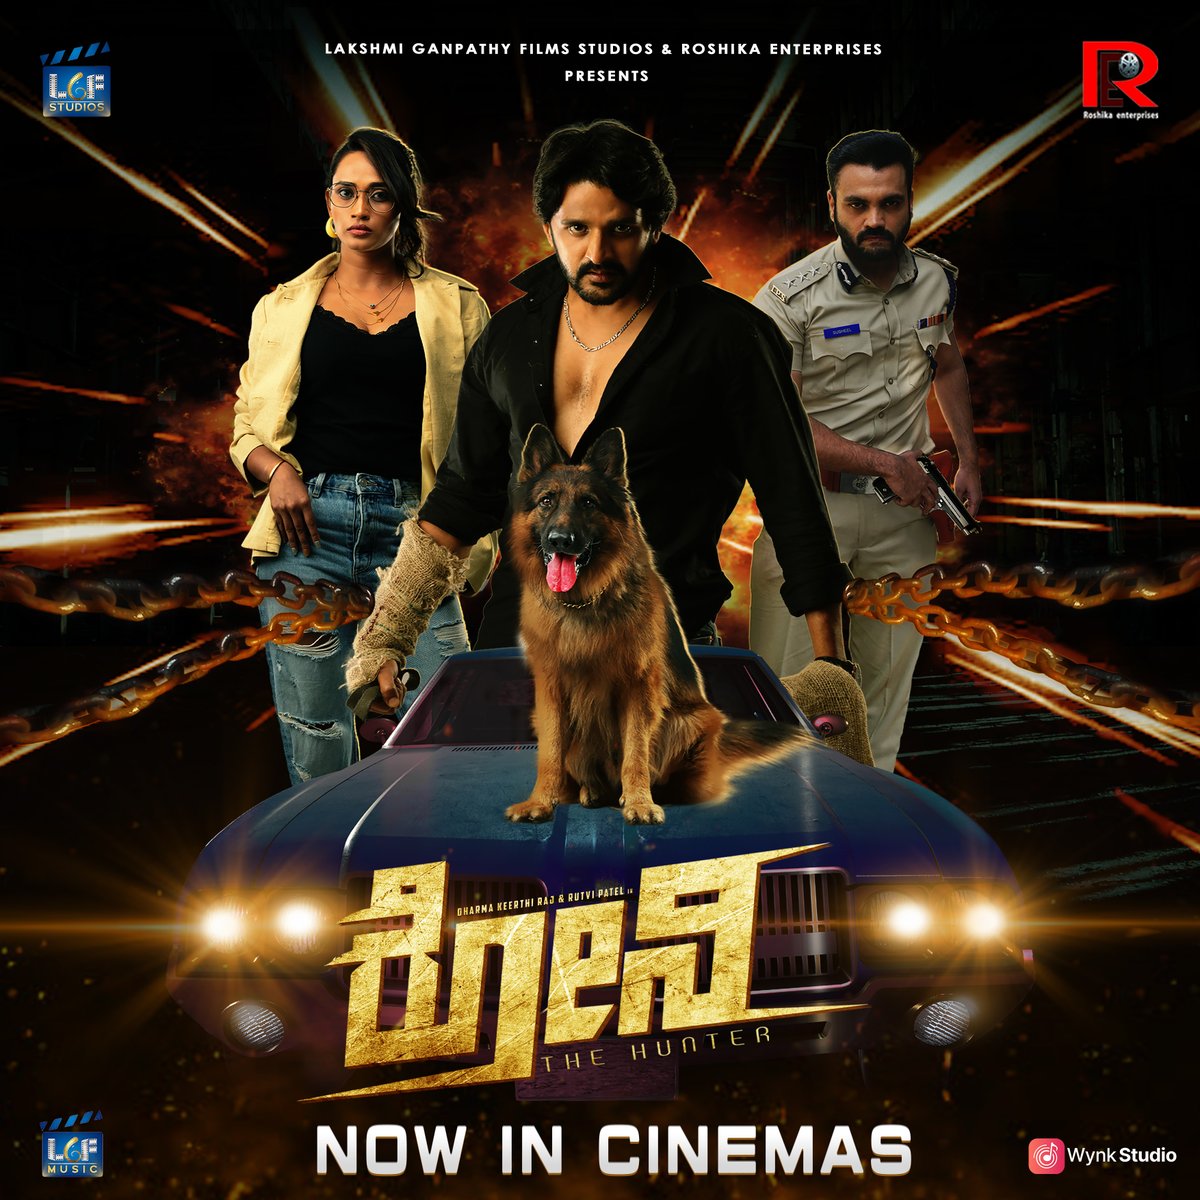 Now playing in cinemas near you! Don't miss the chance to experience the magic of 'Ronnie'. Grab your tickets and enjoy the show! 🎥🍿 @DharmaKirthiraj @Rutvi_patel28 @tilak_shekar #Ronnie #NowInCinemas #MustSeeMovie #MovieMagic